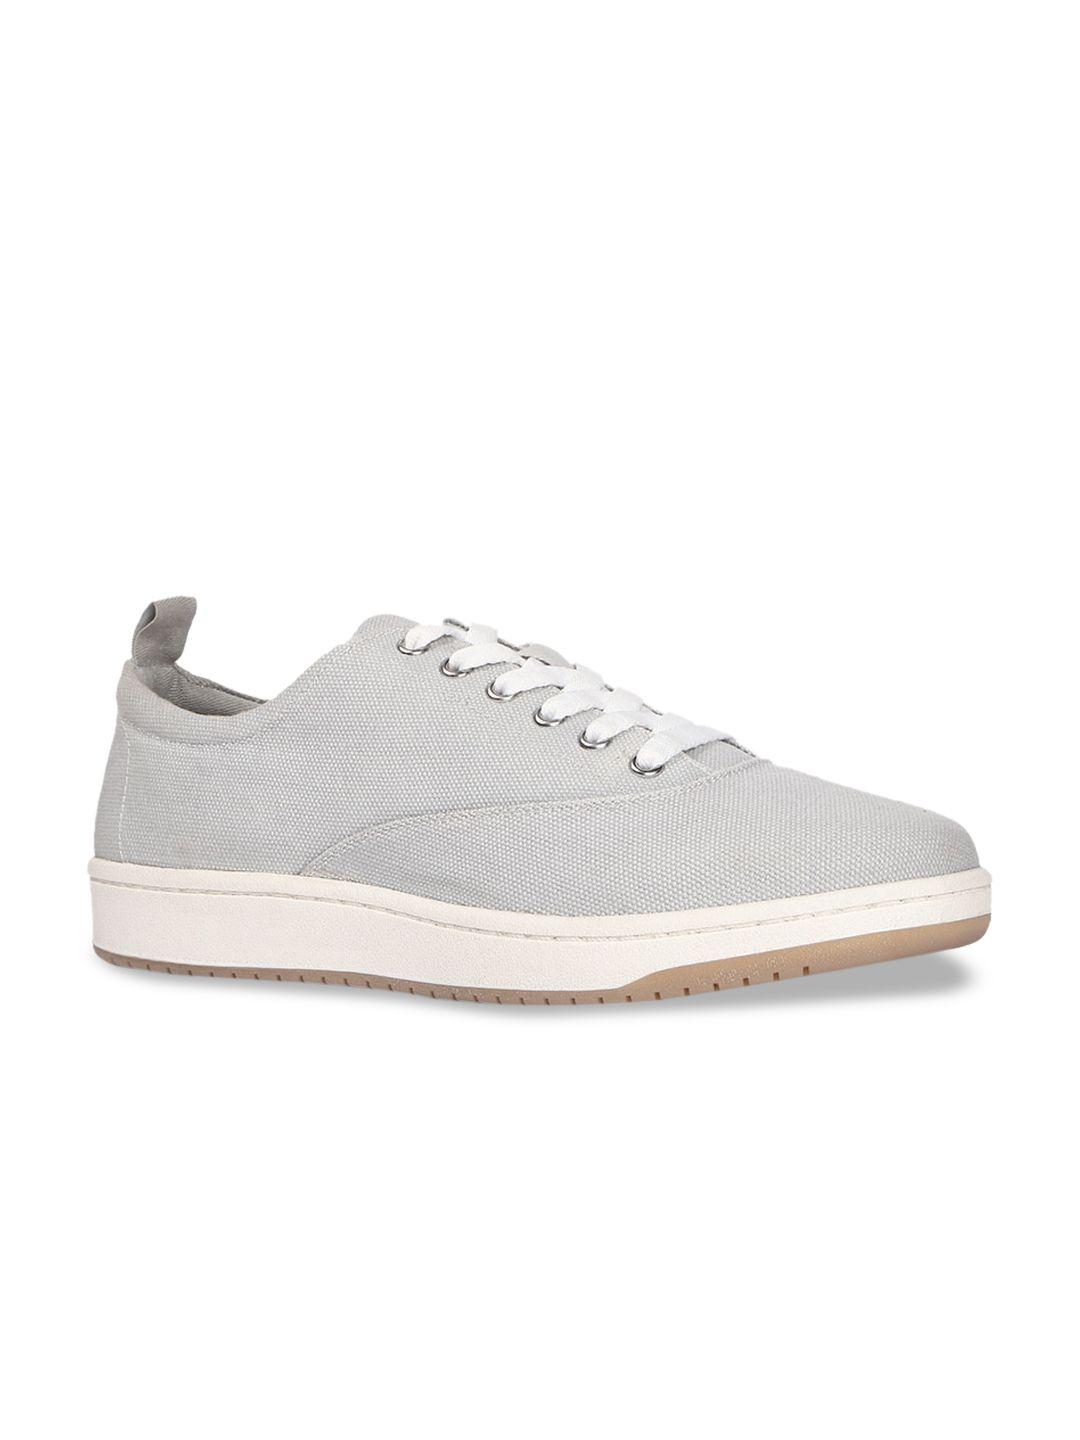 forever-21-men-grey-sneakers-casual-shoes